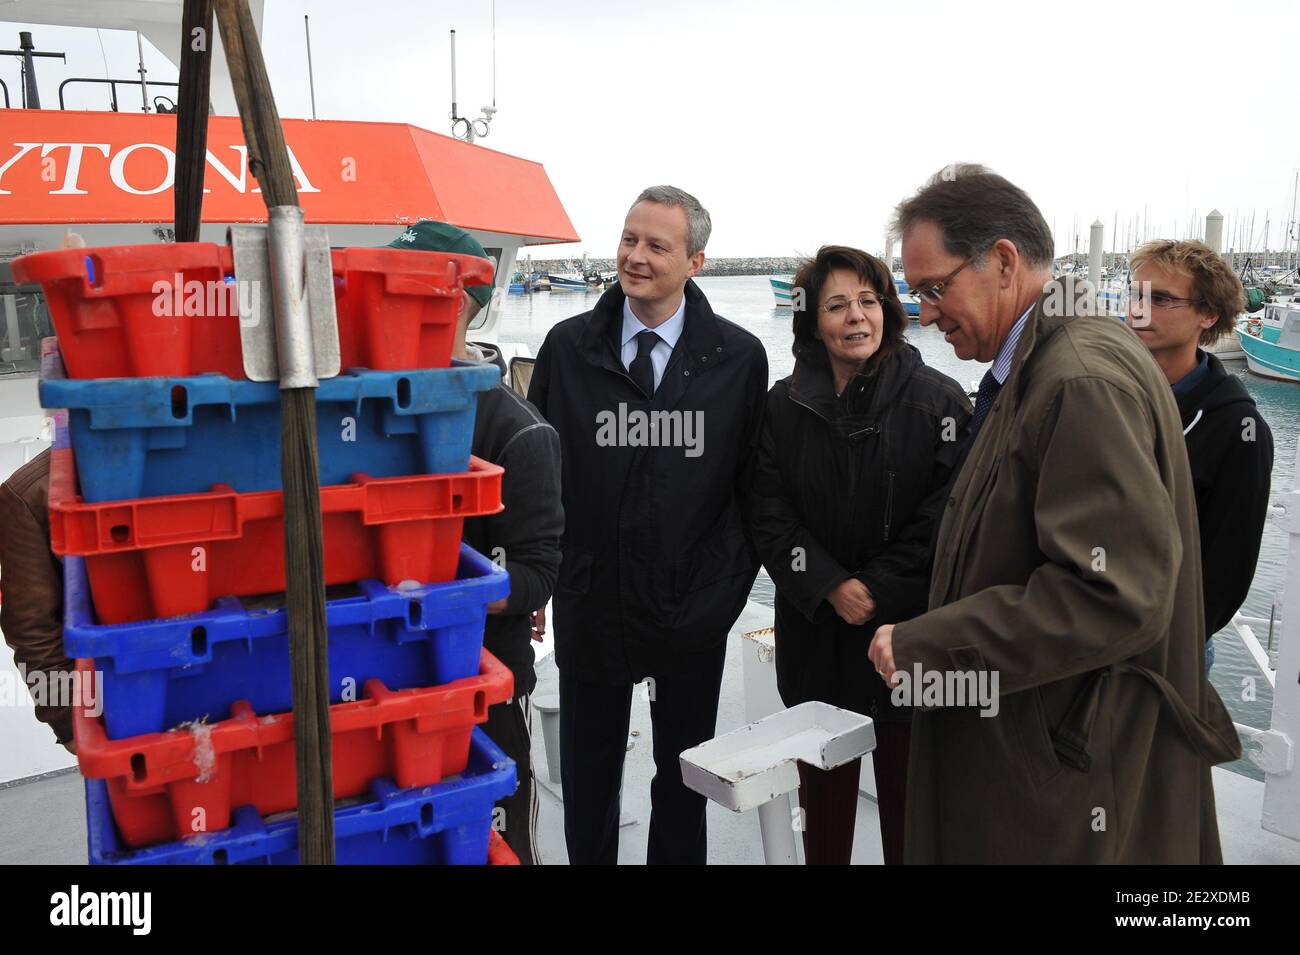 French Minister for Agriculture, Fisheries and Food Bruno Le Maire, EU fisheries and maritime affairs commissioner Maria Damanaki and European deputy Alain Cadec meet fischermen in Saint-Quay Portrieux, France on May 7, 2010. Bruno Le Maire and Maria Damanaki meet professionals of fishing in Brittany. Photo Thierry Orban/ABACAPRESS.COM Stock Photo